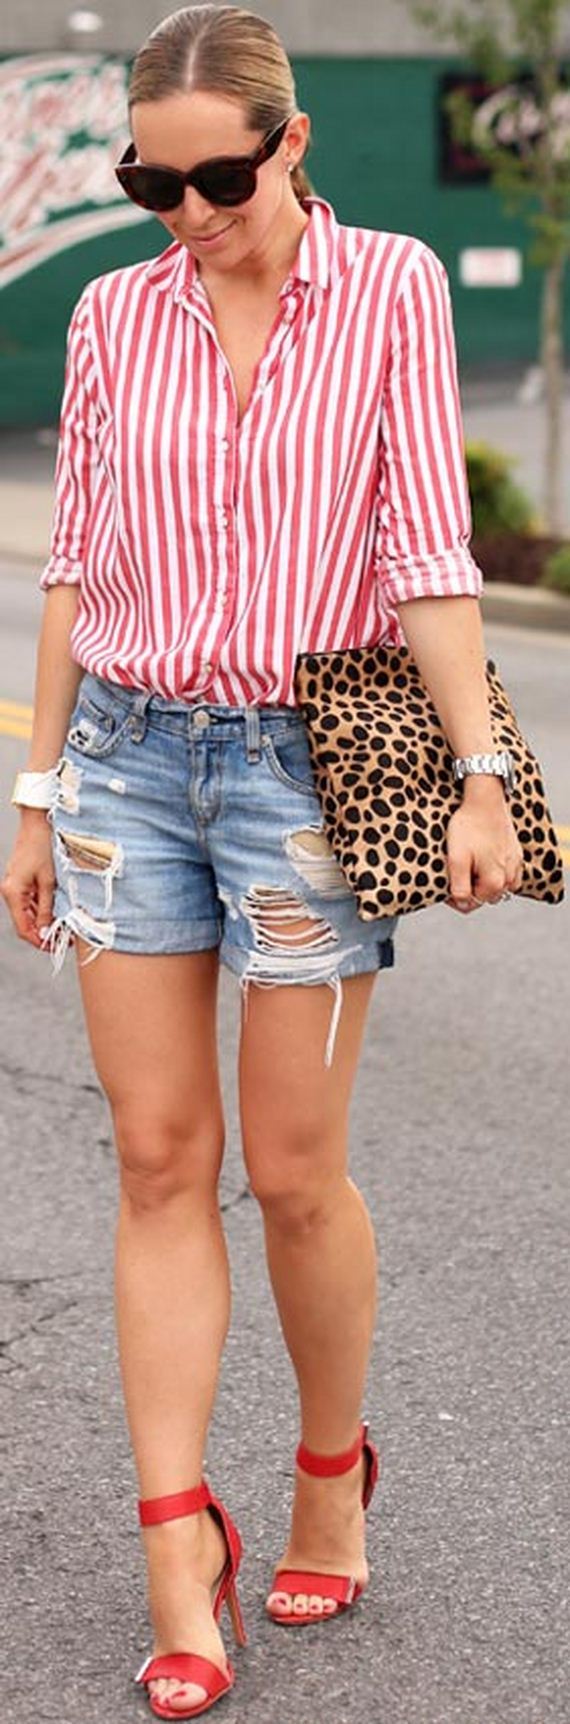 20-Cute-Summer-Outfits